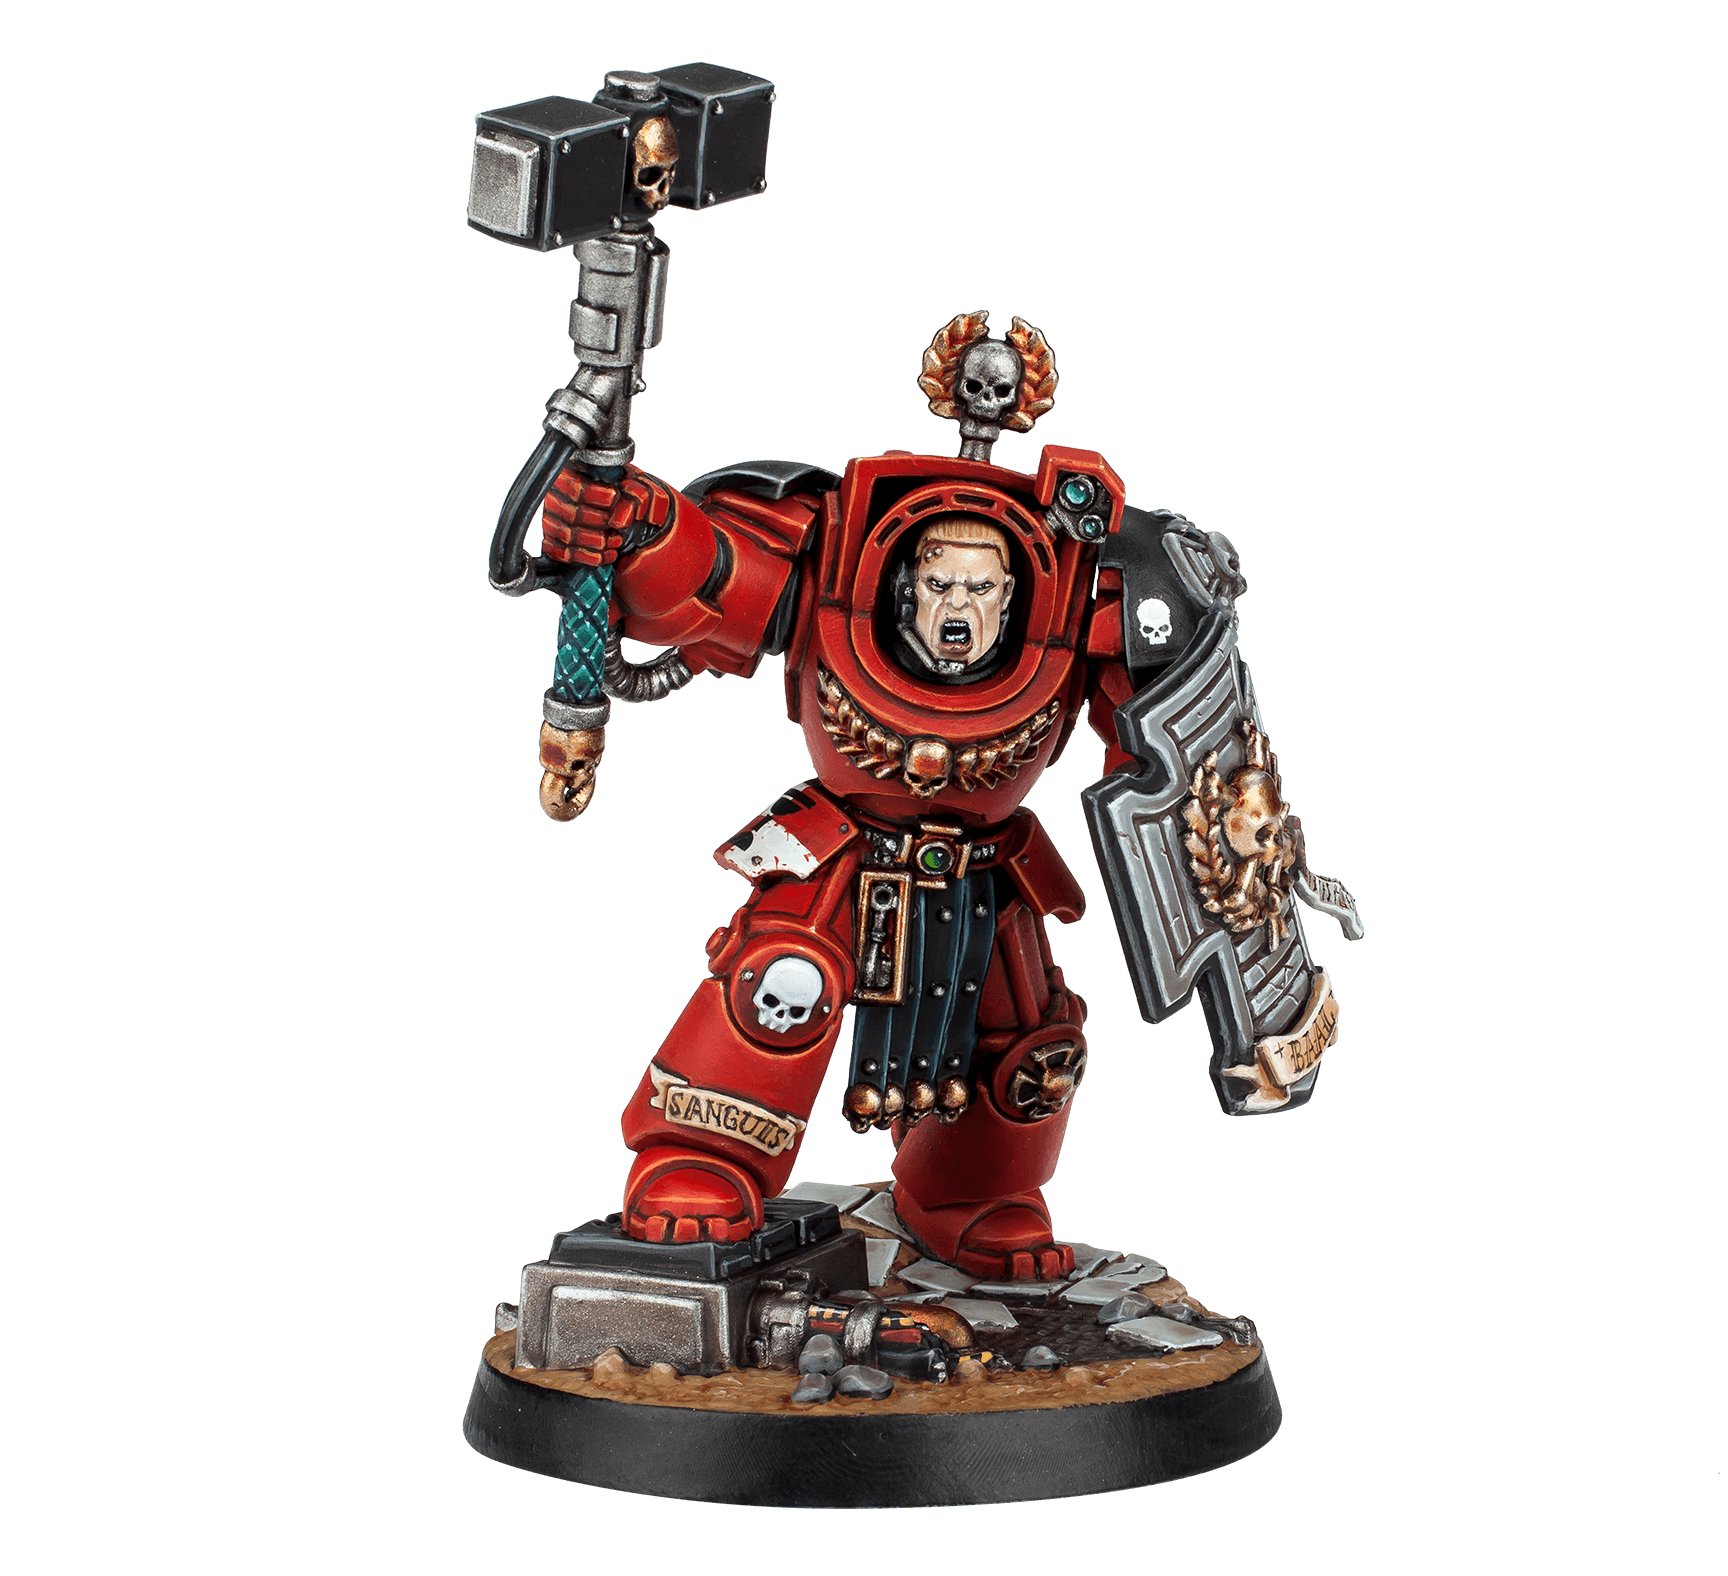 WH40K-SPACE MARINE Heroes-Série 2-Le sergent victorno New Warhammer 40K 